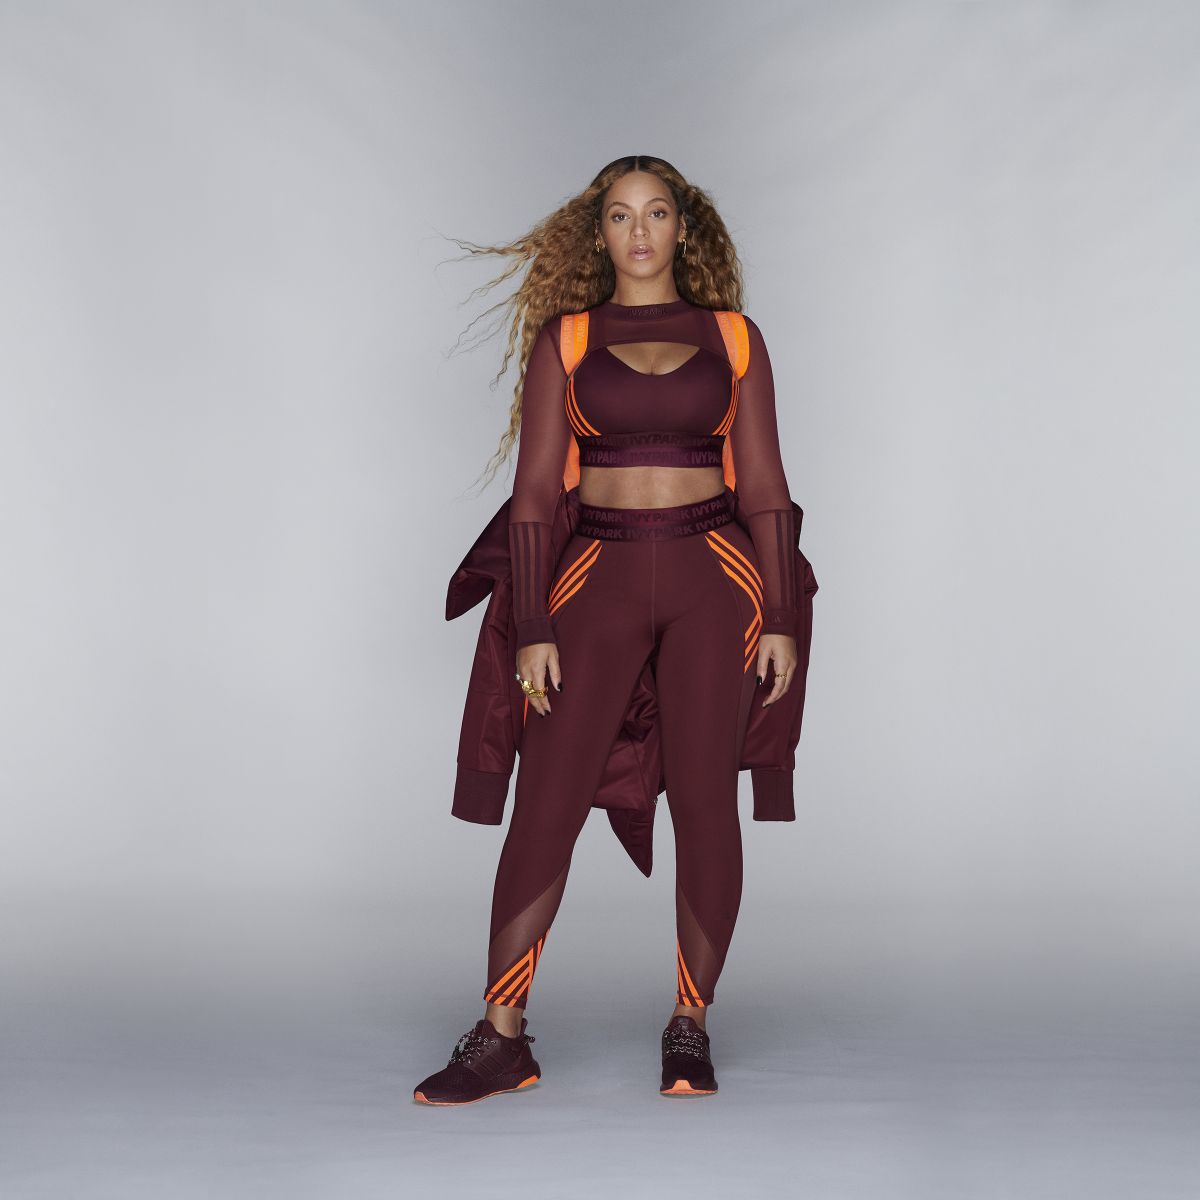 BEYONCE KNOWLES for Adidas x Ivy Park, January 2020 – HawtCelebs